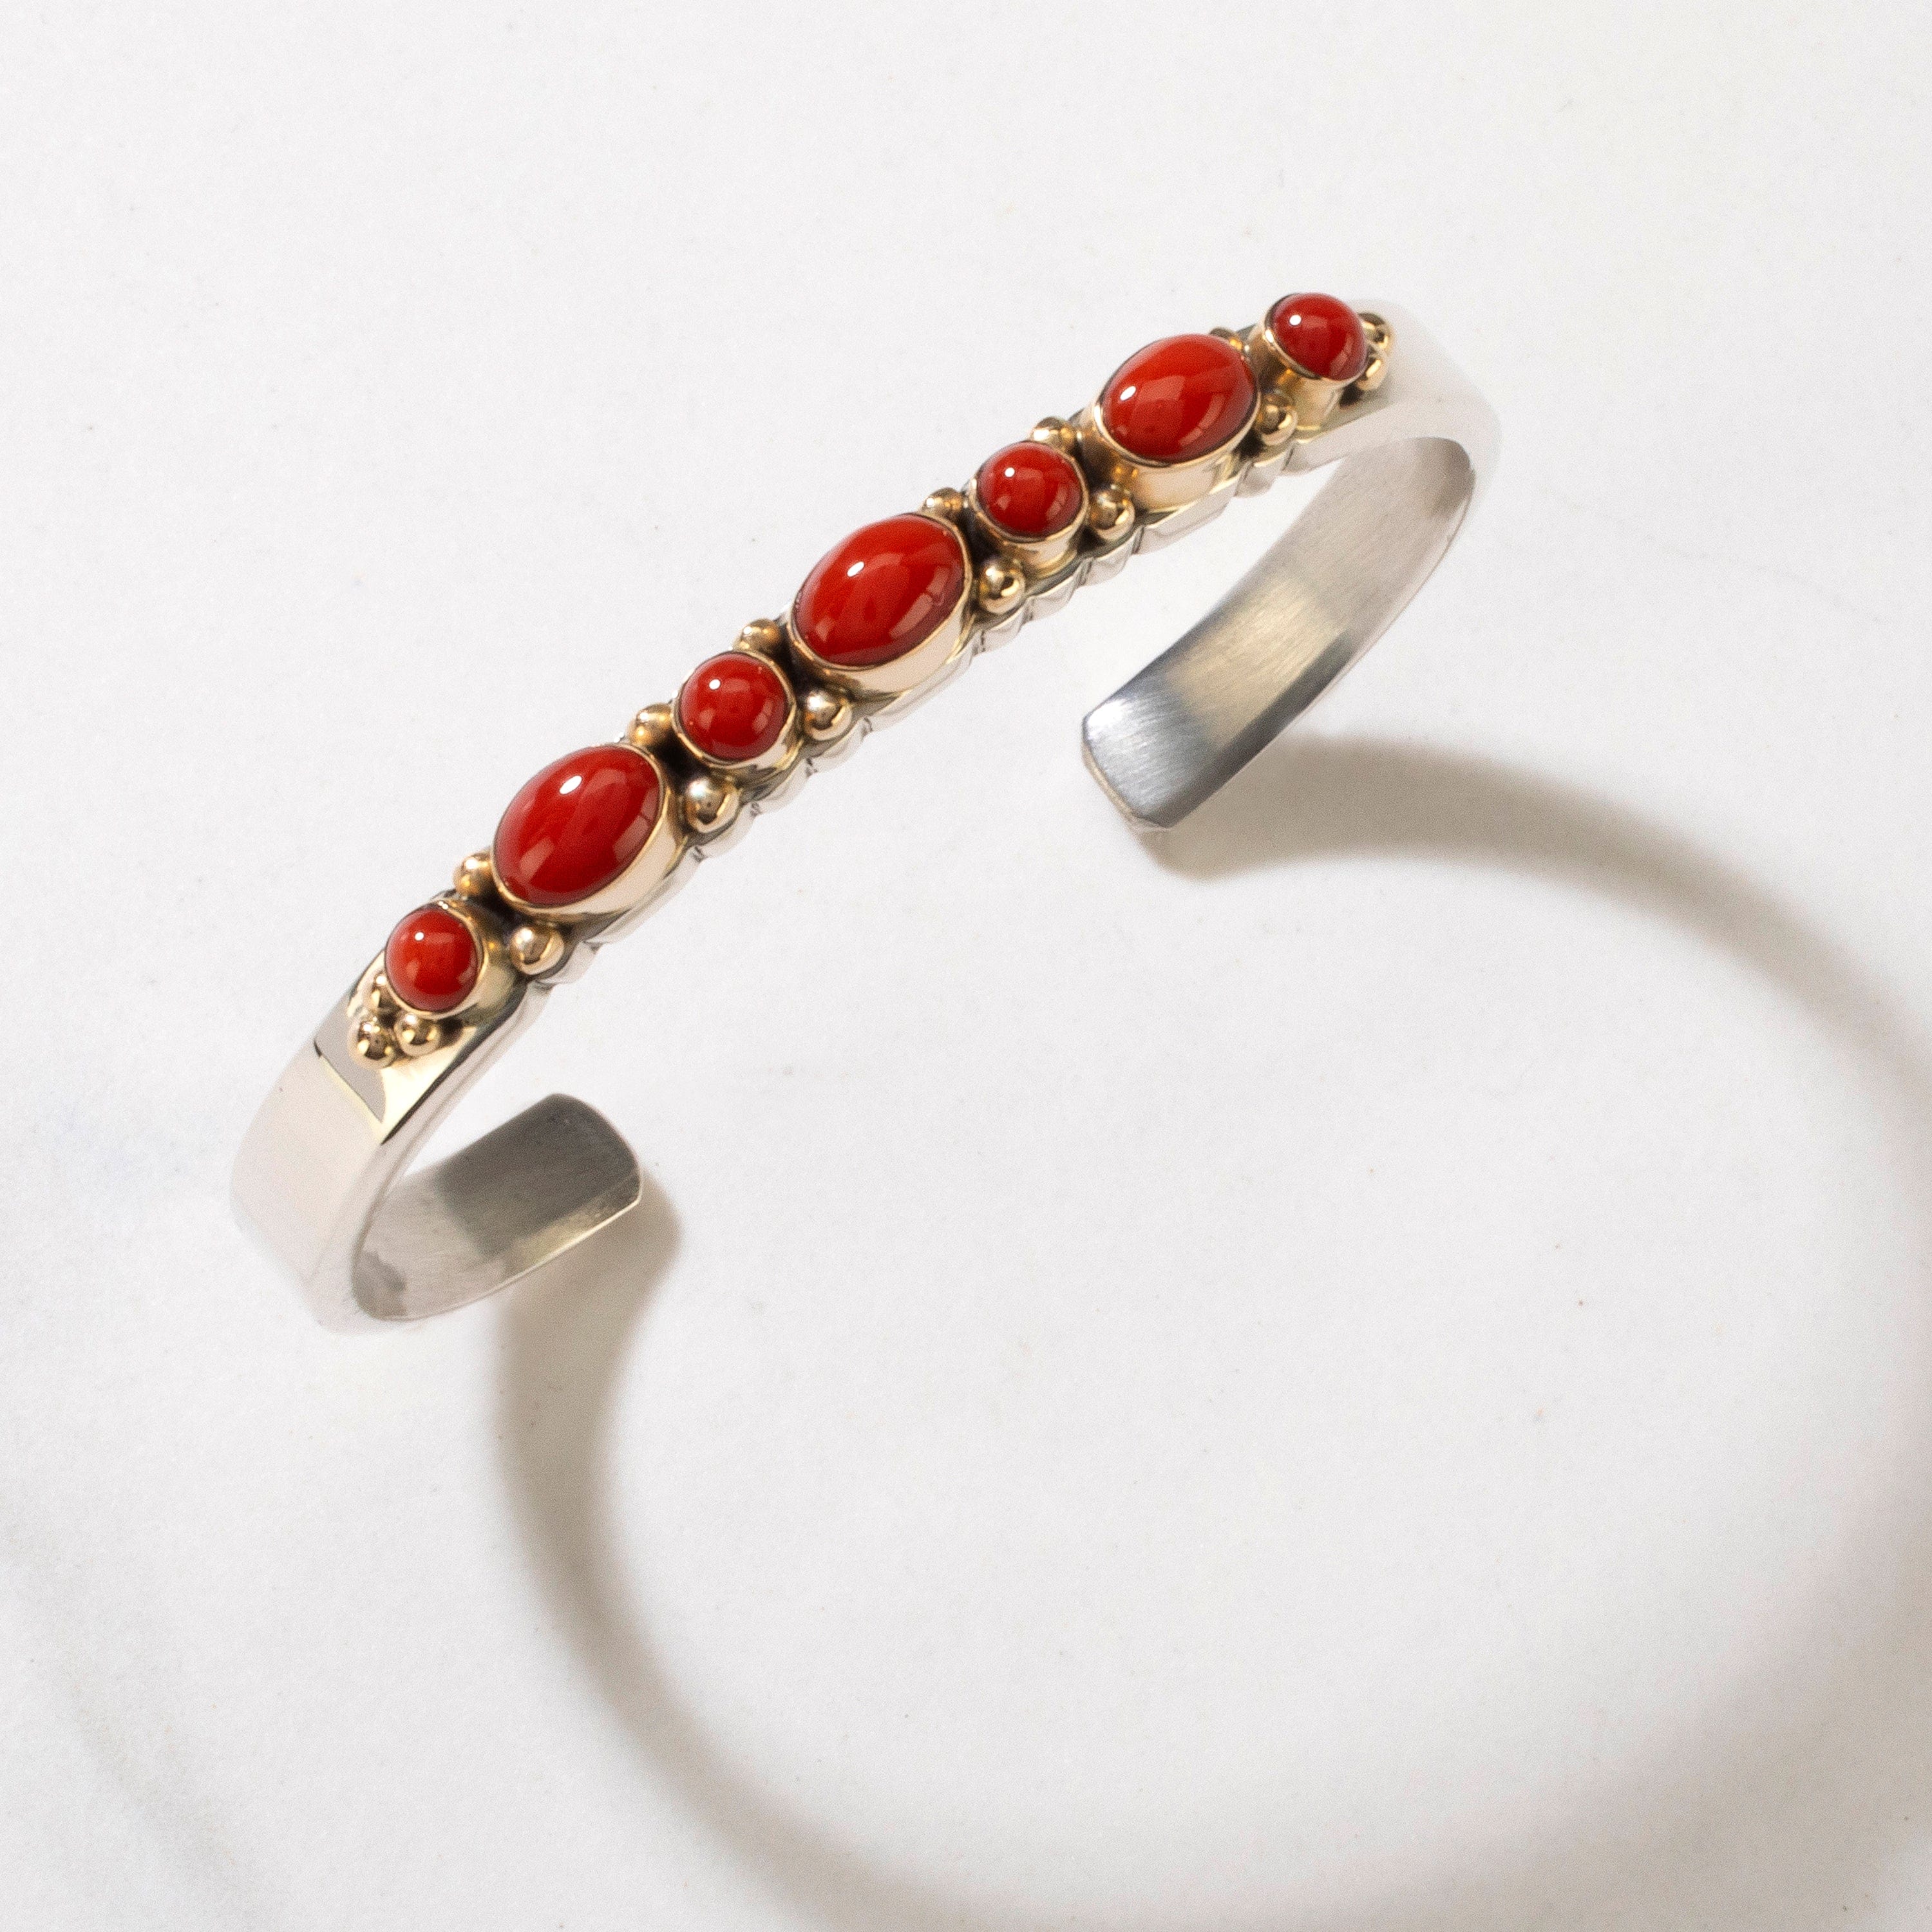 Kalifano Native American Jewelry Ray Bennett Navajo 14K Gold and Red Coral USA Native American Made 925 Sterling Silver Cuff NAB2400.019